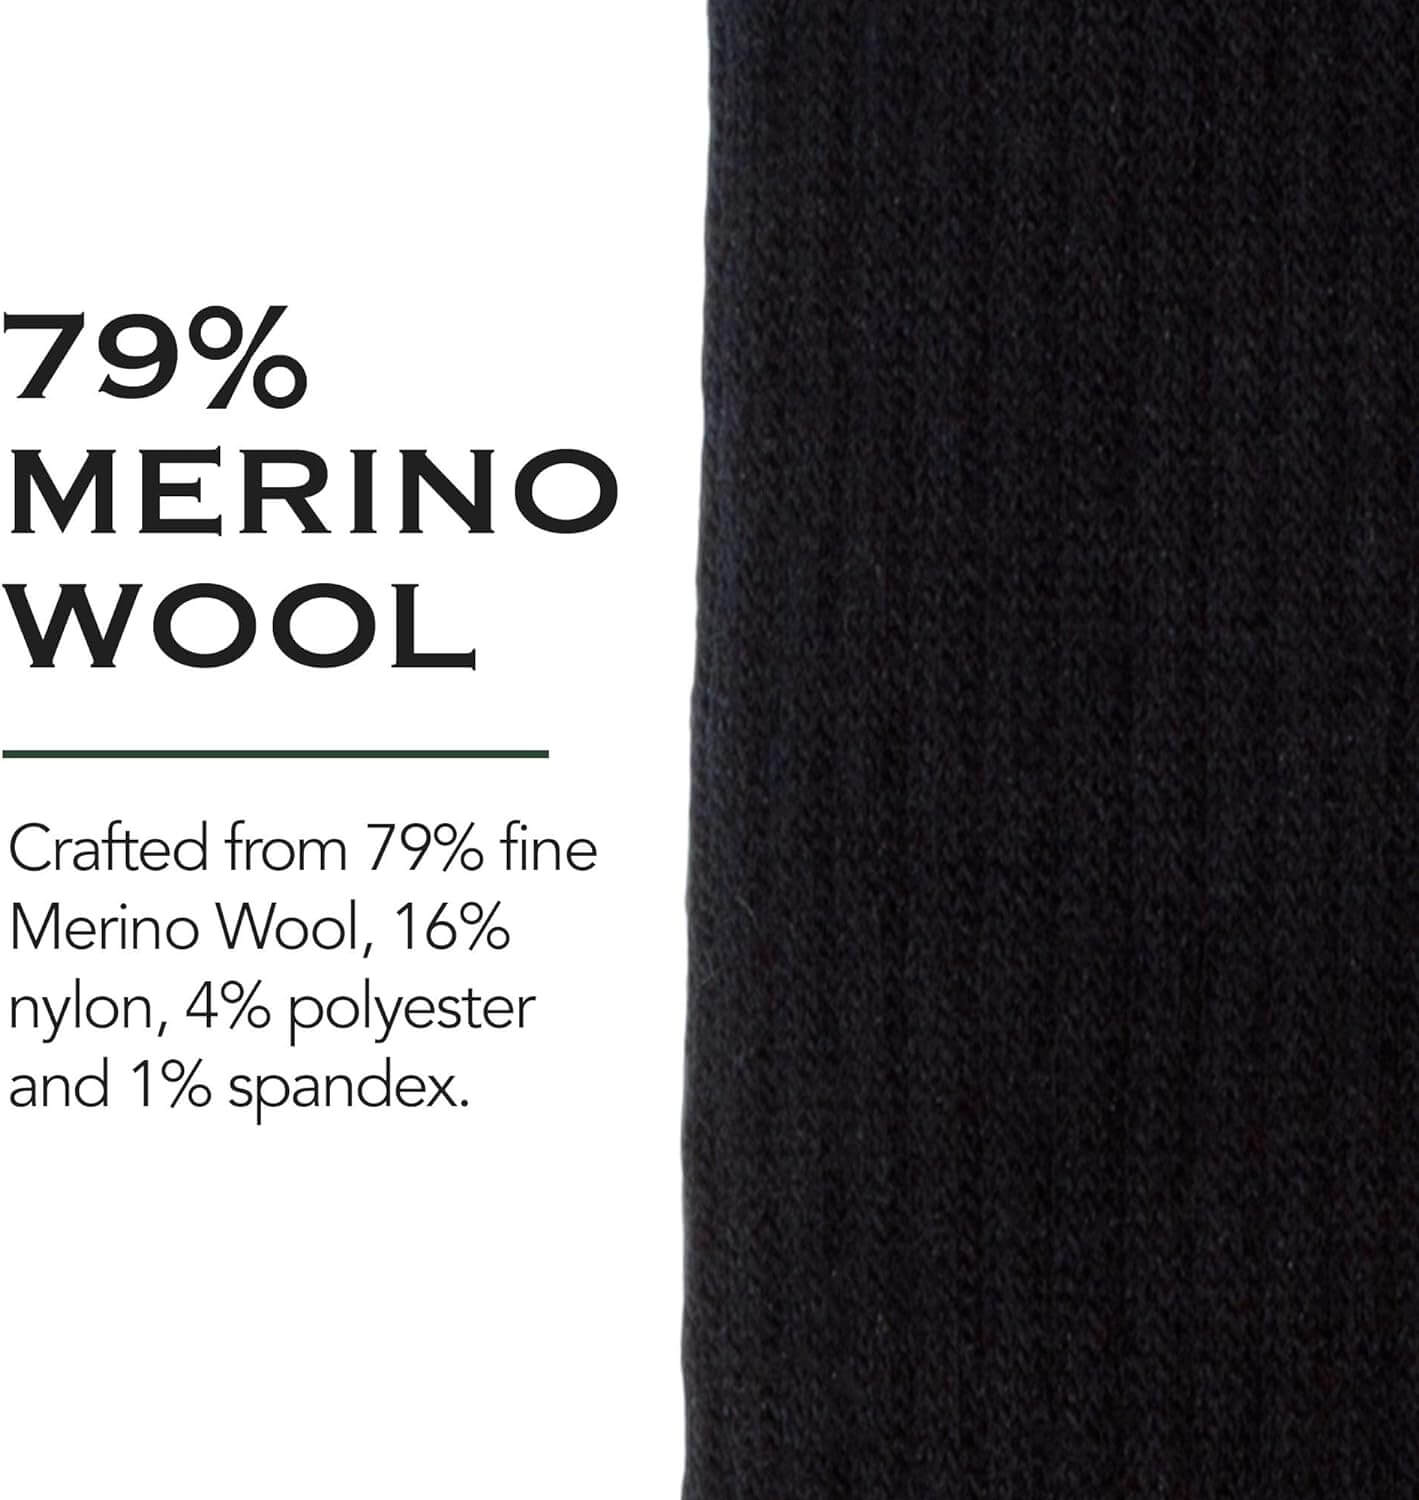 Shop The Latest >2 Pairs Woolrich Merino Wool Socks for Men - Made in USA > *Only $51.23*> From The Top Brand > *Woolrichl* > Shop Now and Get Free Shipping On Orders Over $45.00 >*Shop Earth Foot*